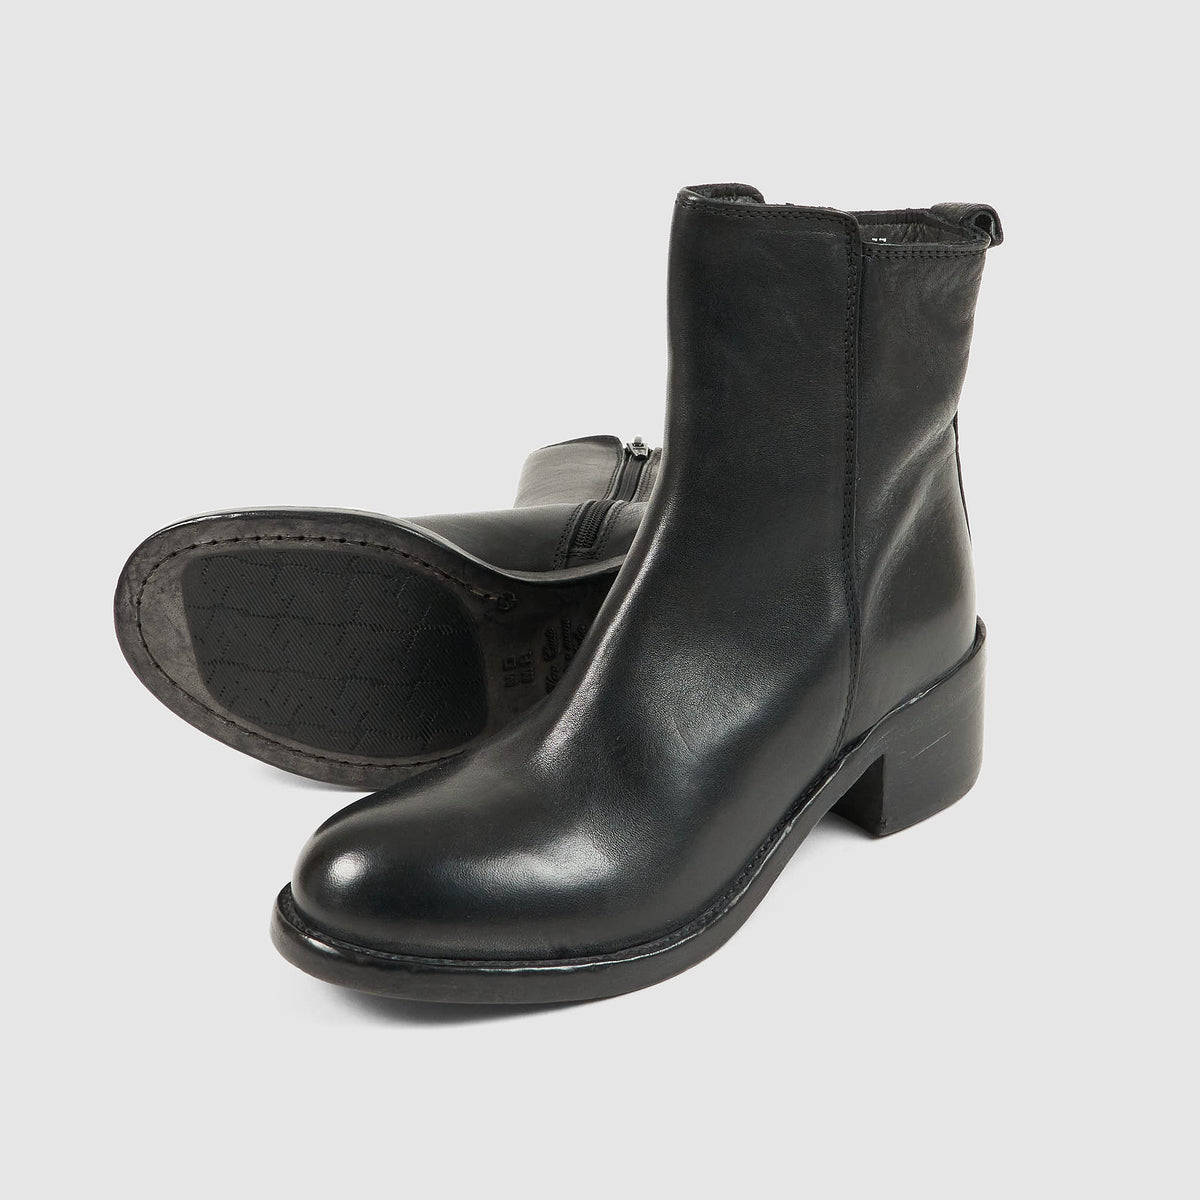 Moma Ladies Tronchetto Chelsea Ankle Boot